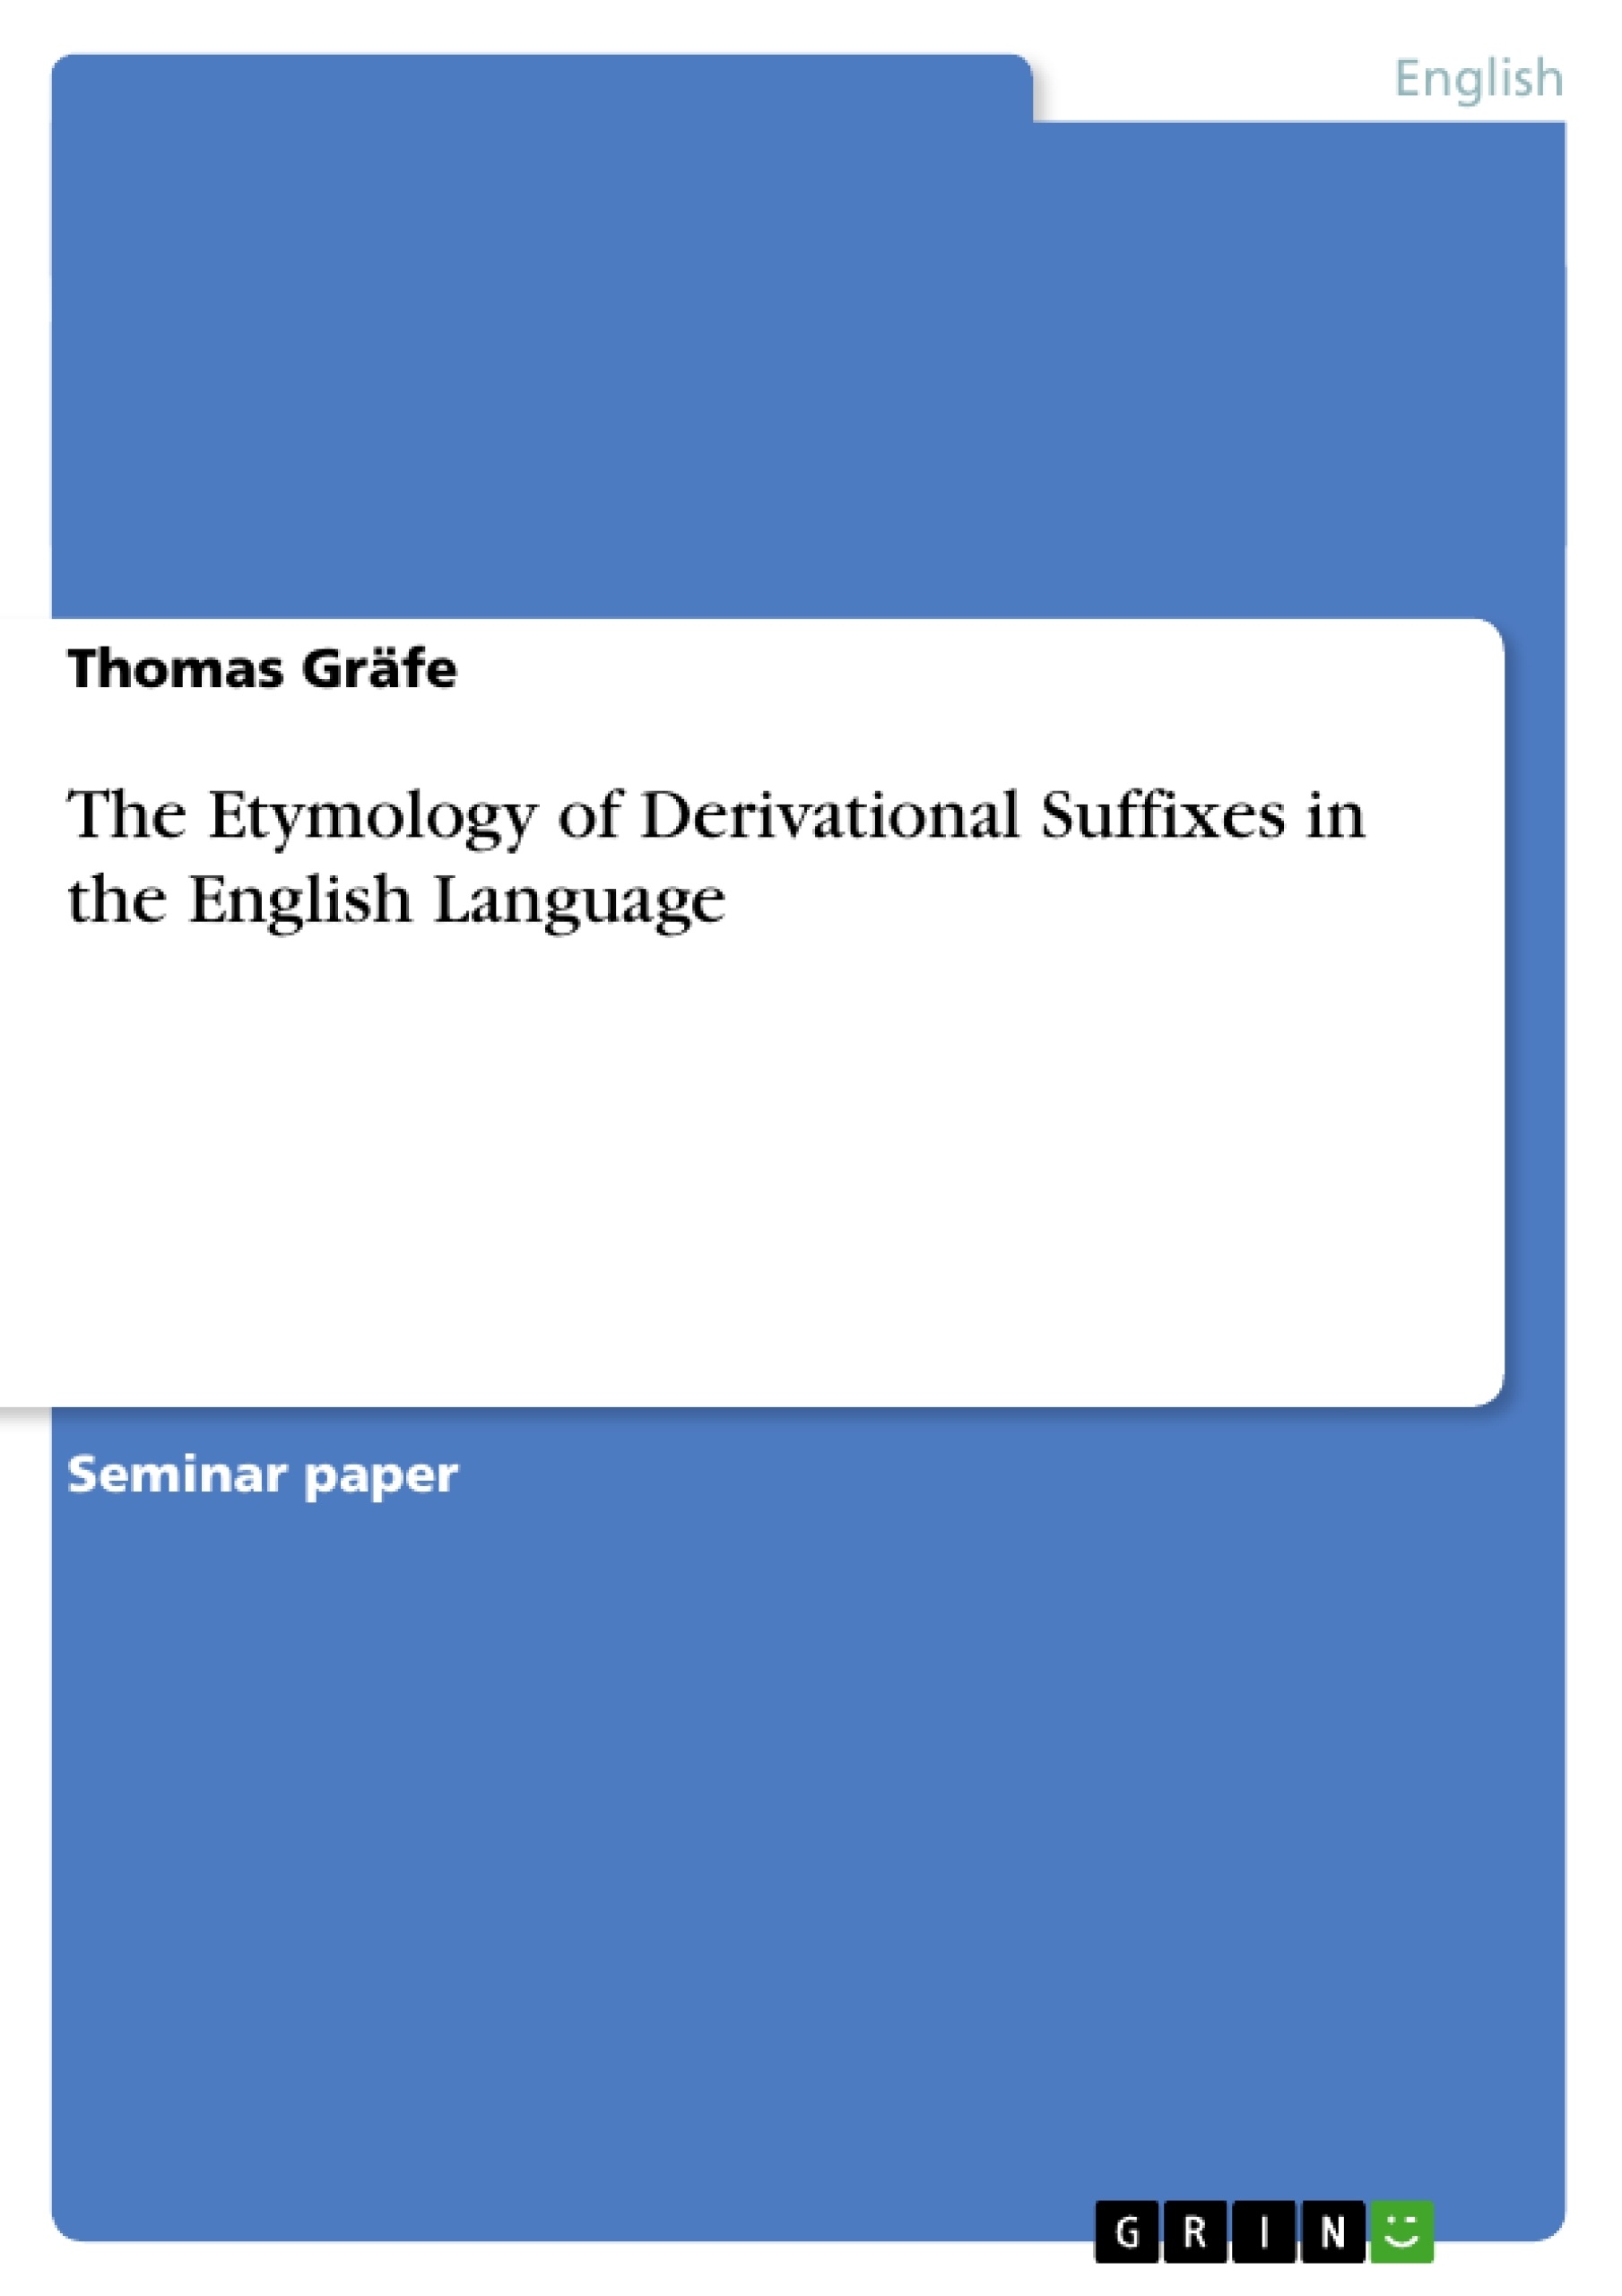 Title: The Etymology of Derivational Suffixes in the English Language